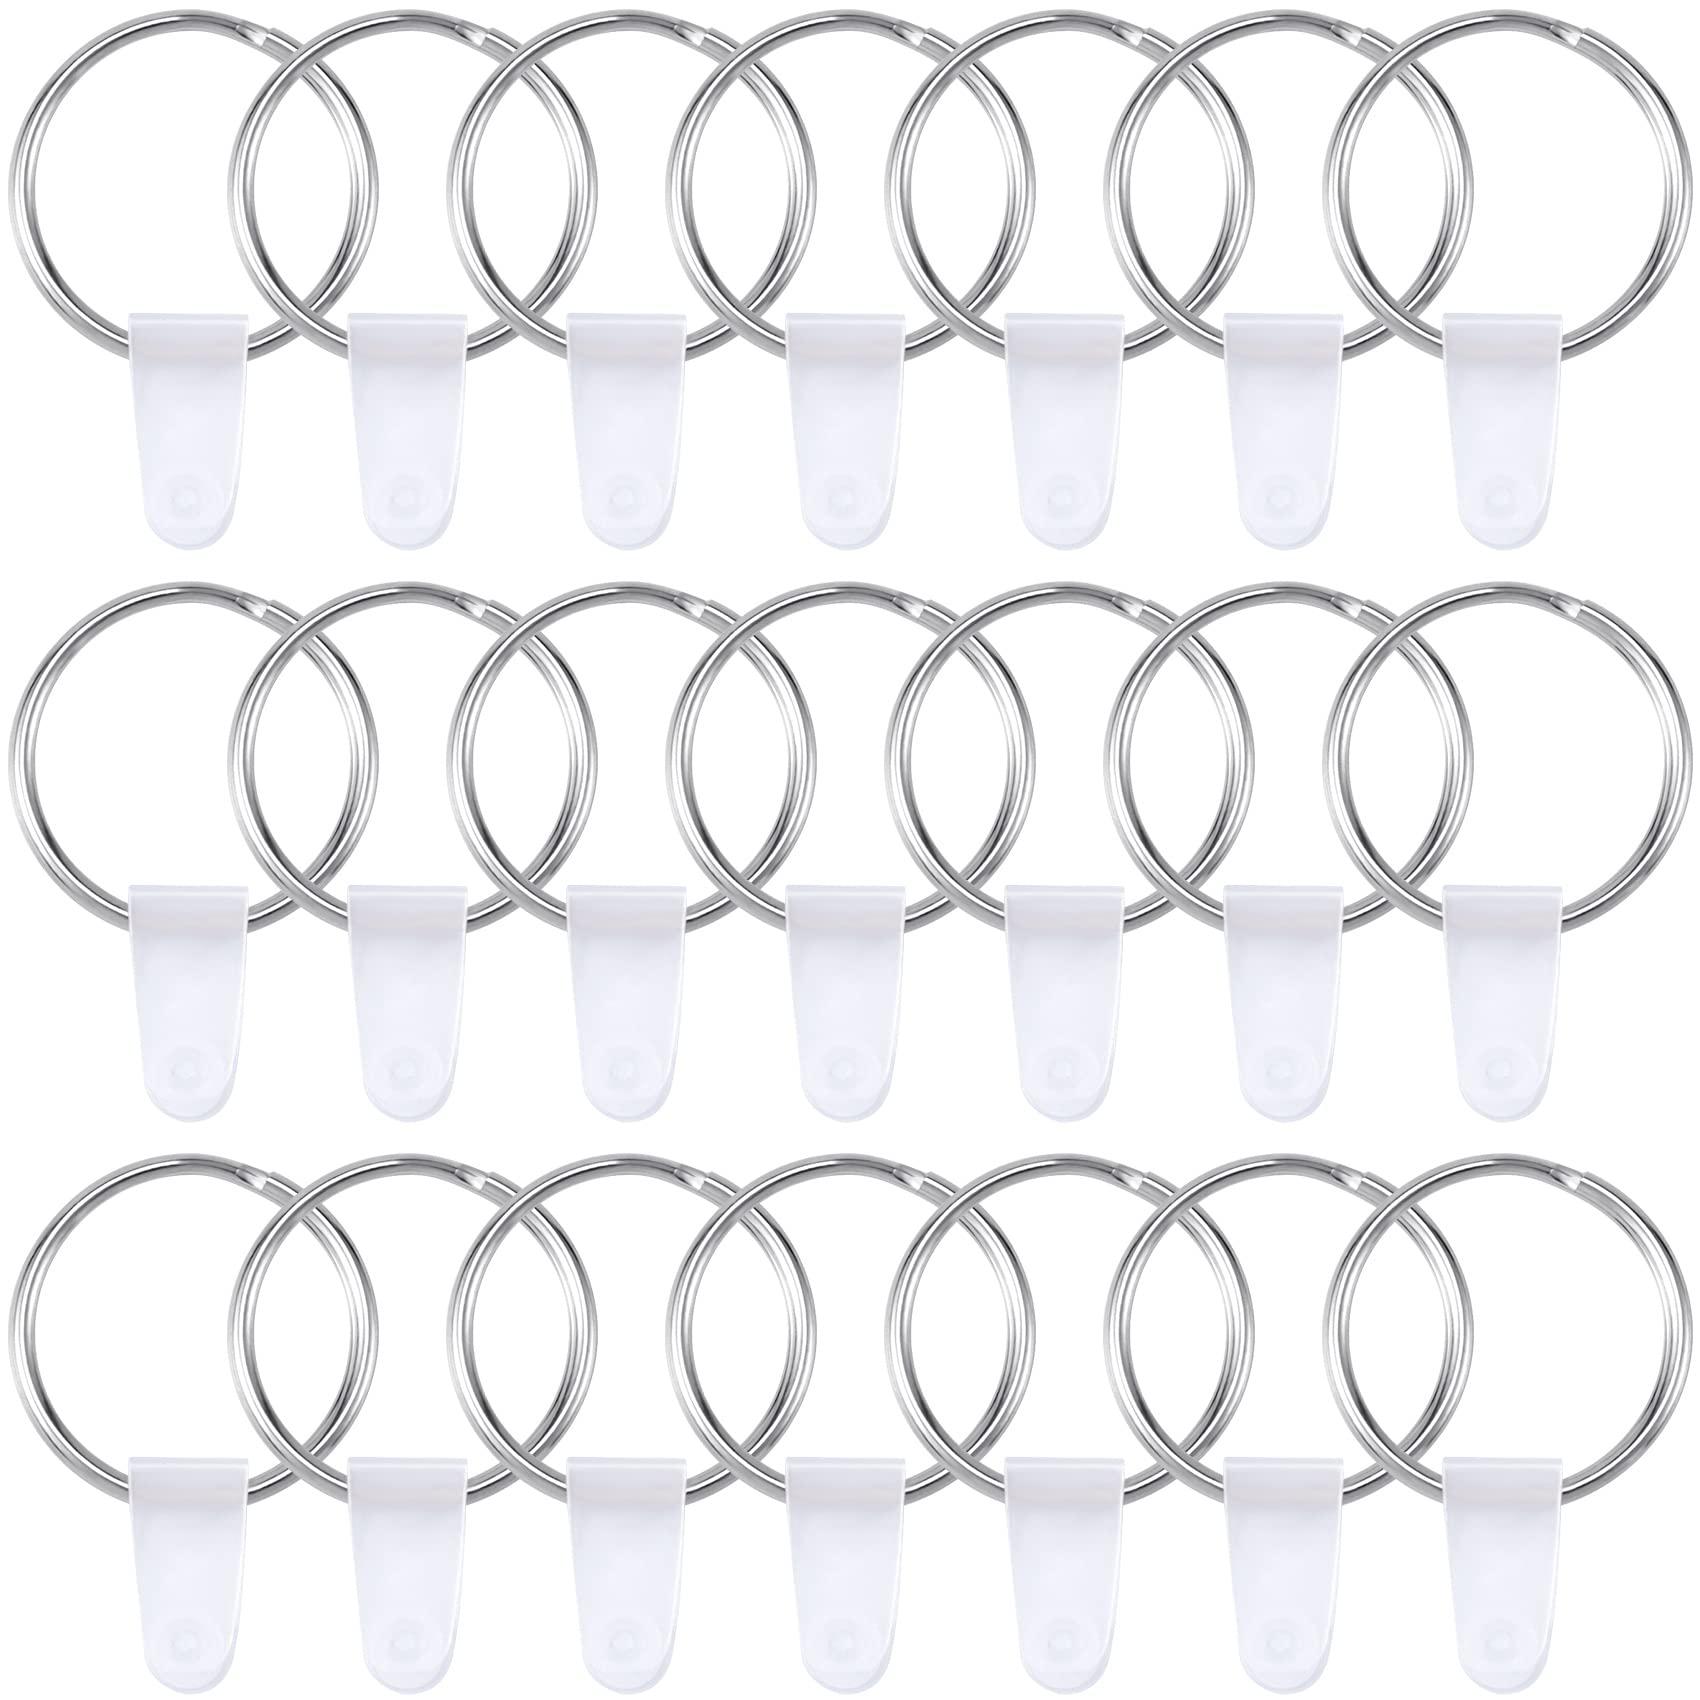 OIIKI 100 Sets Keychain Rings for Crafts, Round Split Key Rings, Metal Keychain Connector with Clear Plastic Snap Tabs, Blank, Metal